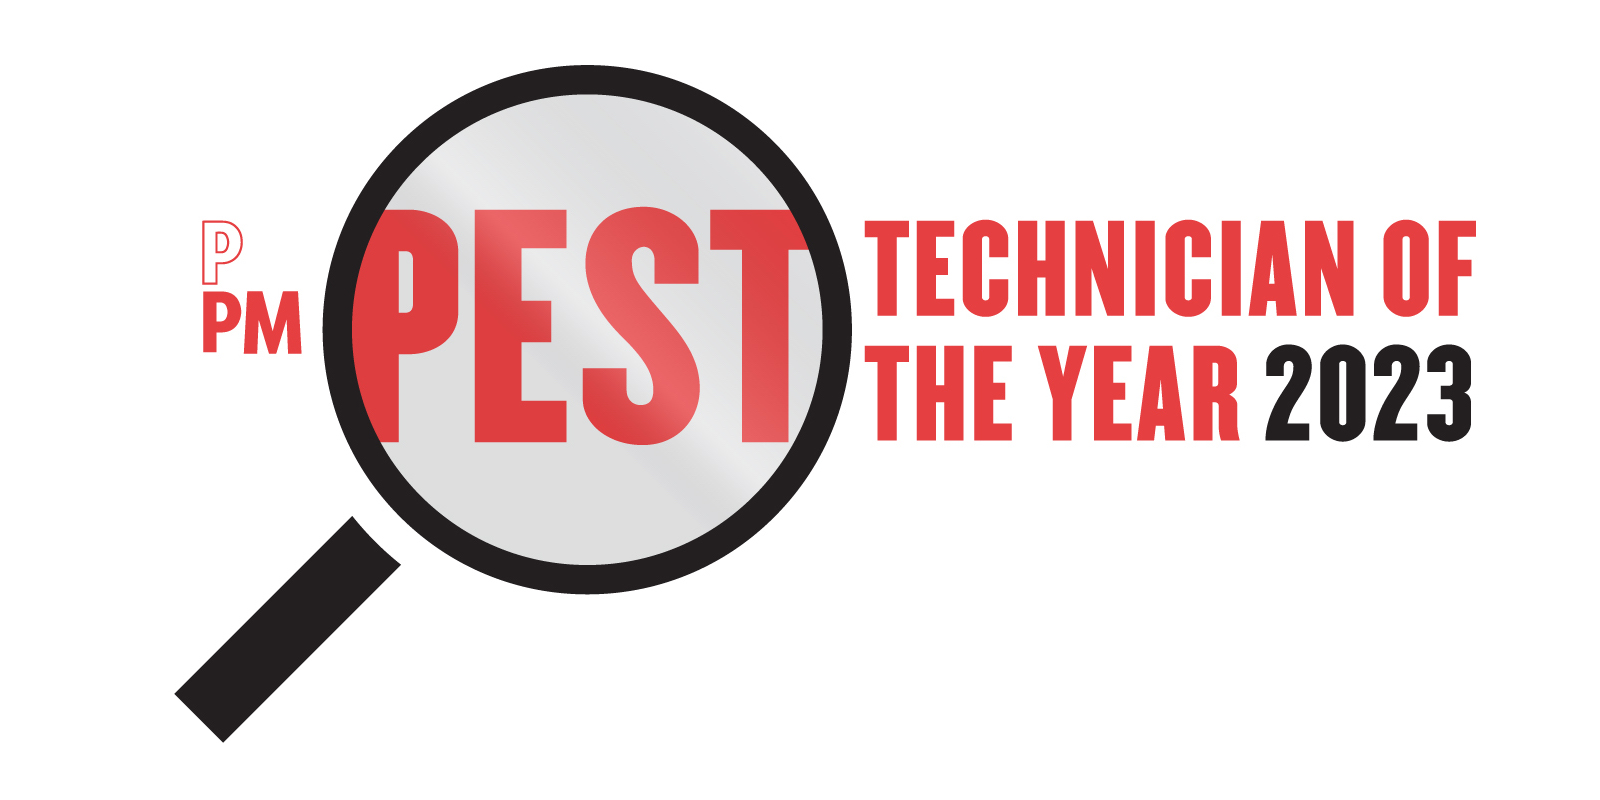 Pest Technician of the Year 2023 logo